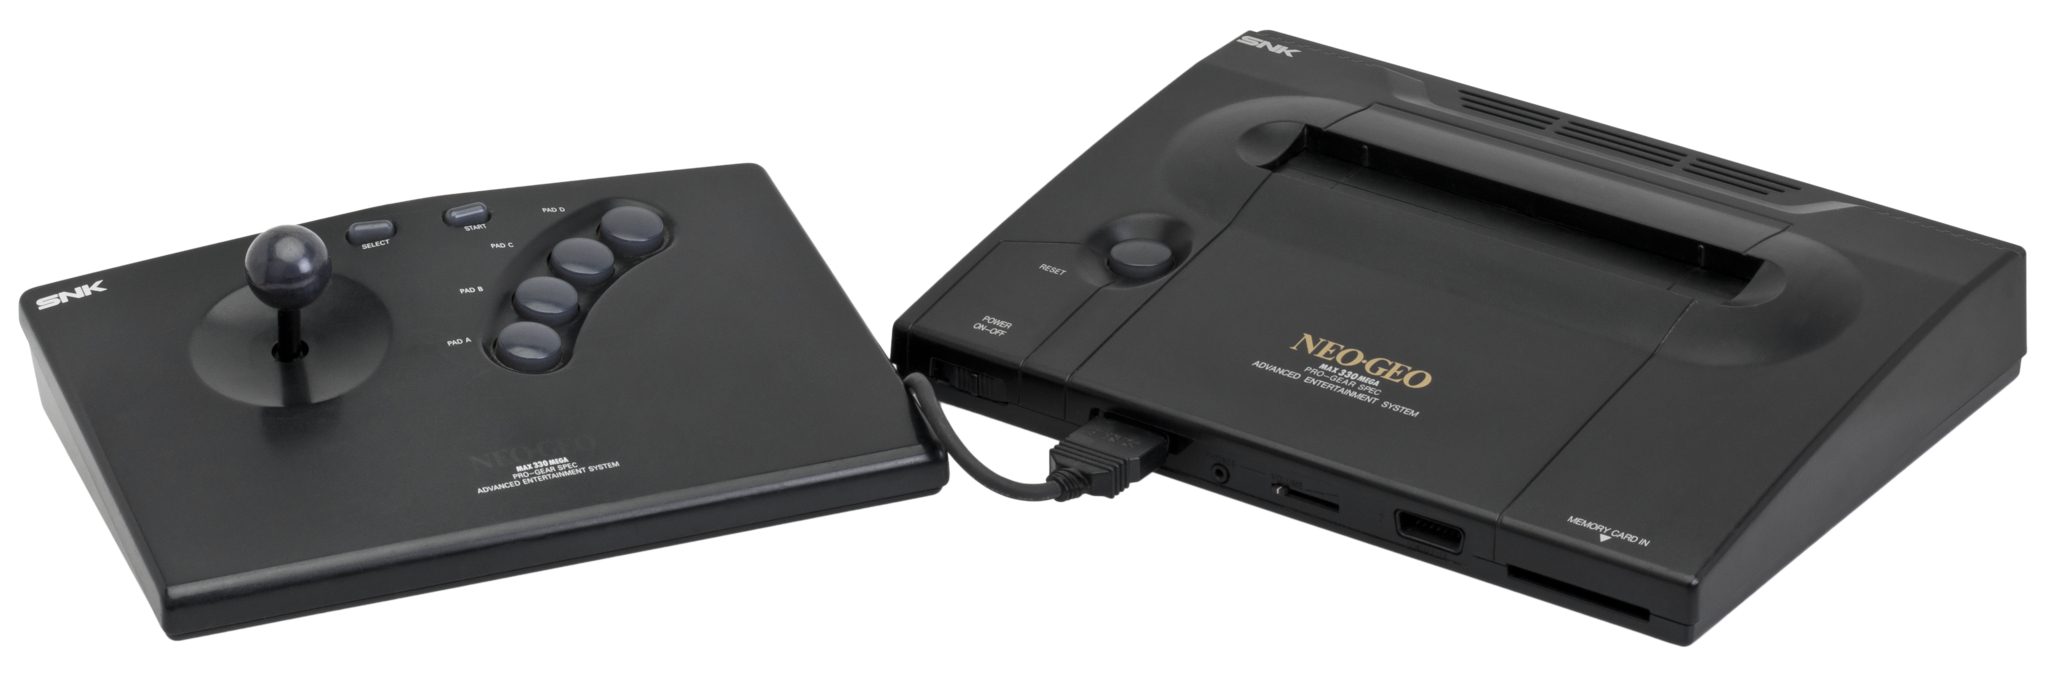 Power Supply for SNK Neo Geo AES – Retro Game Supply